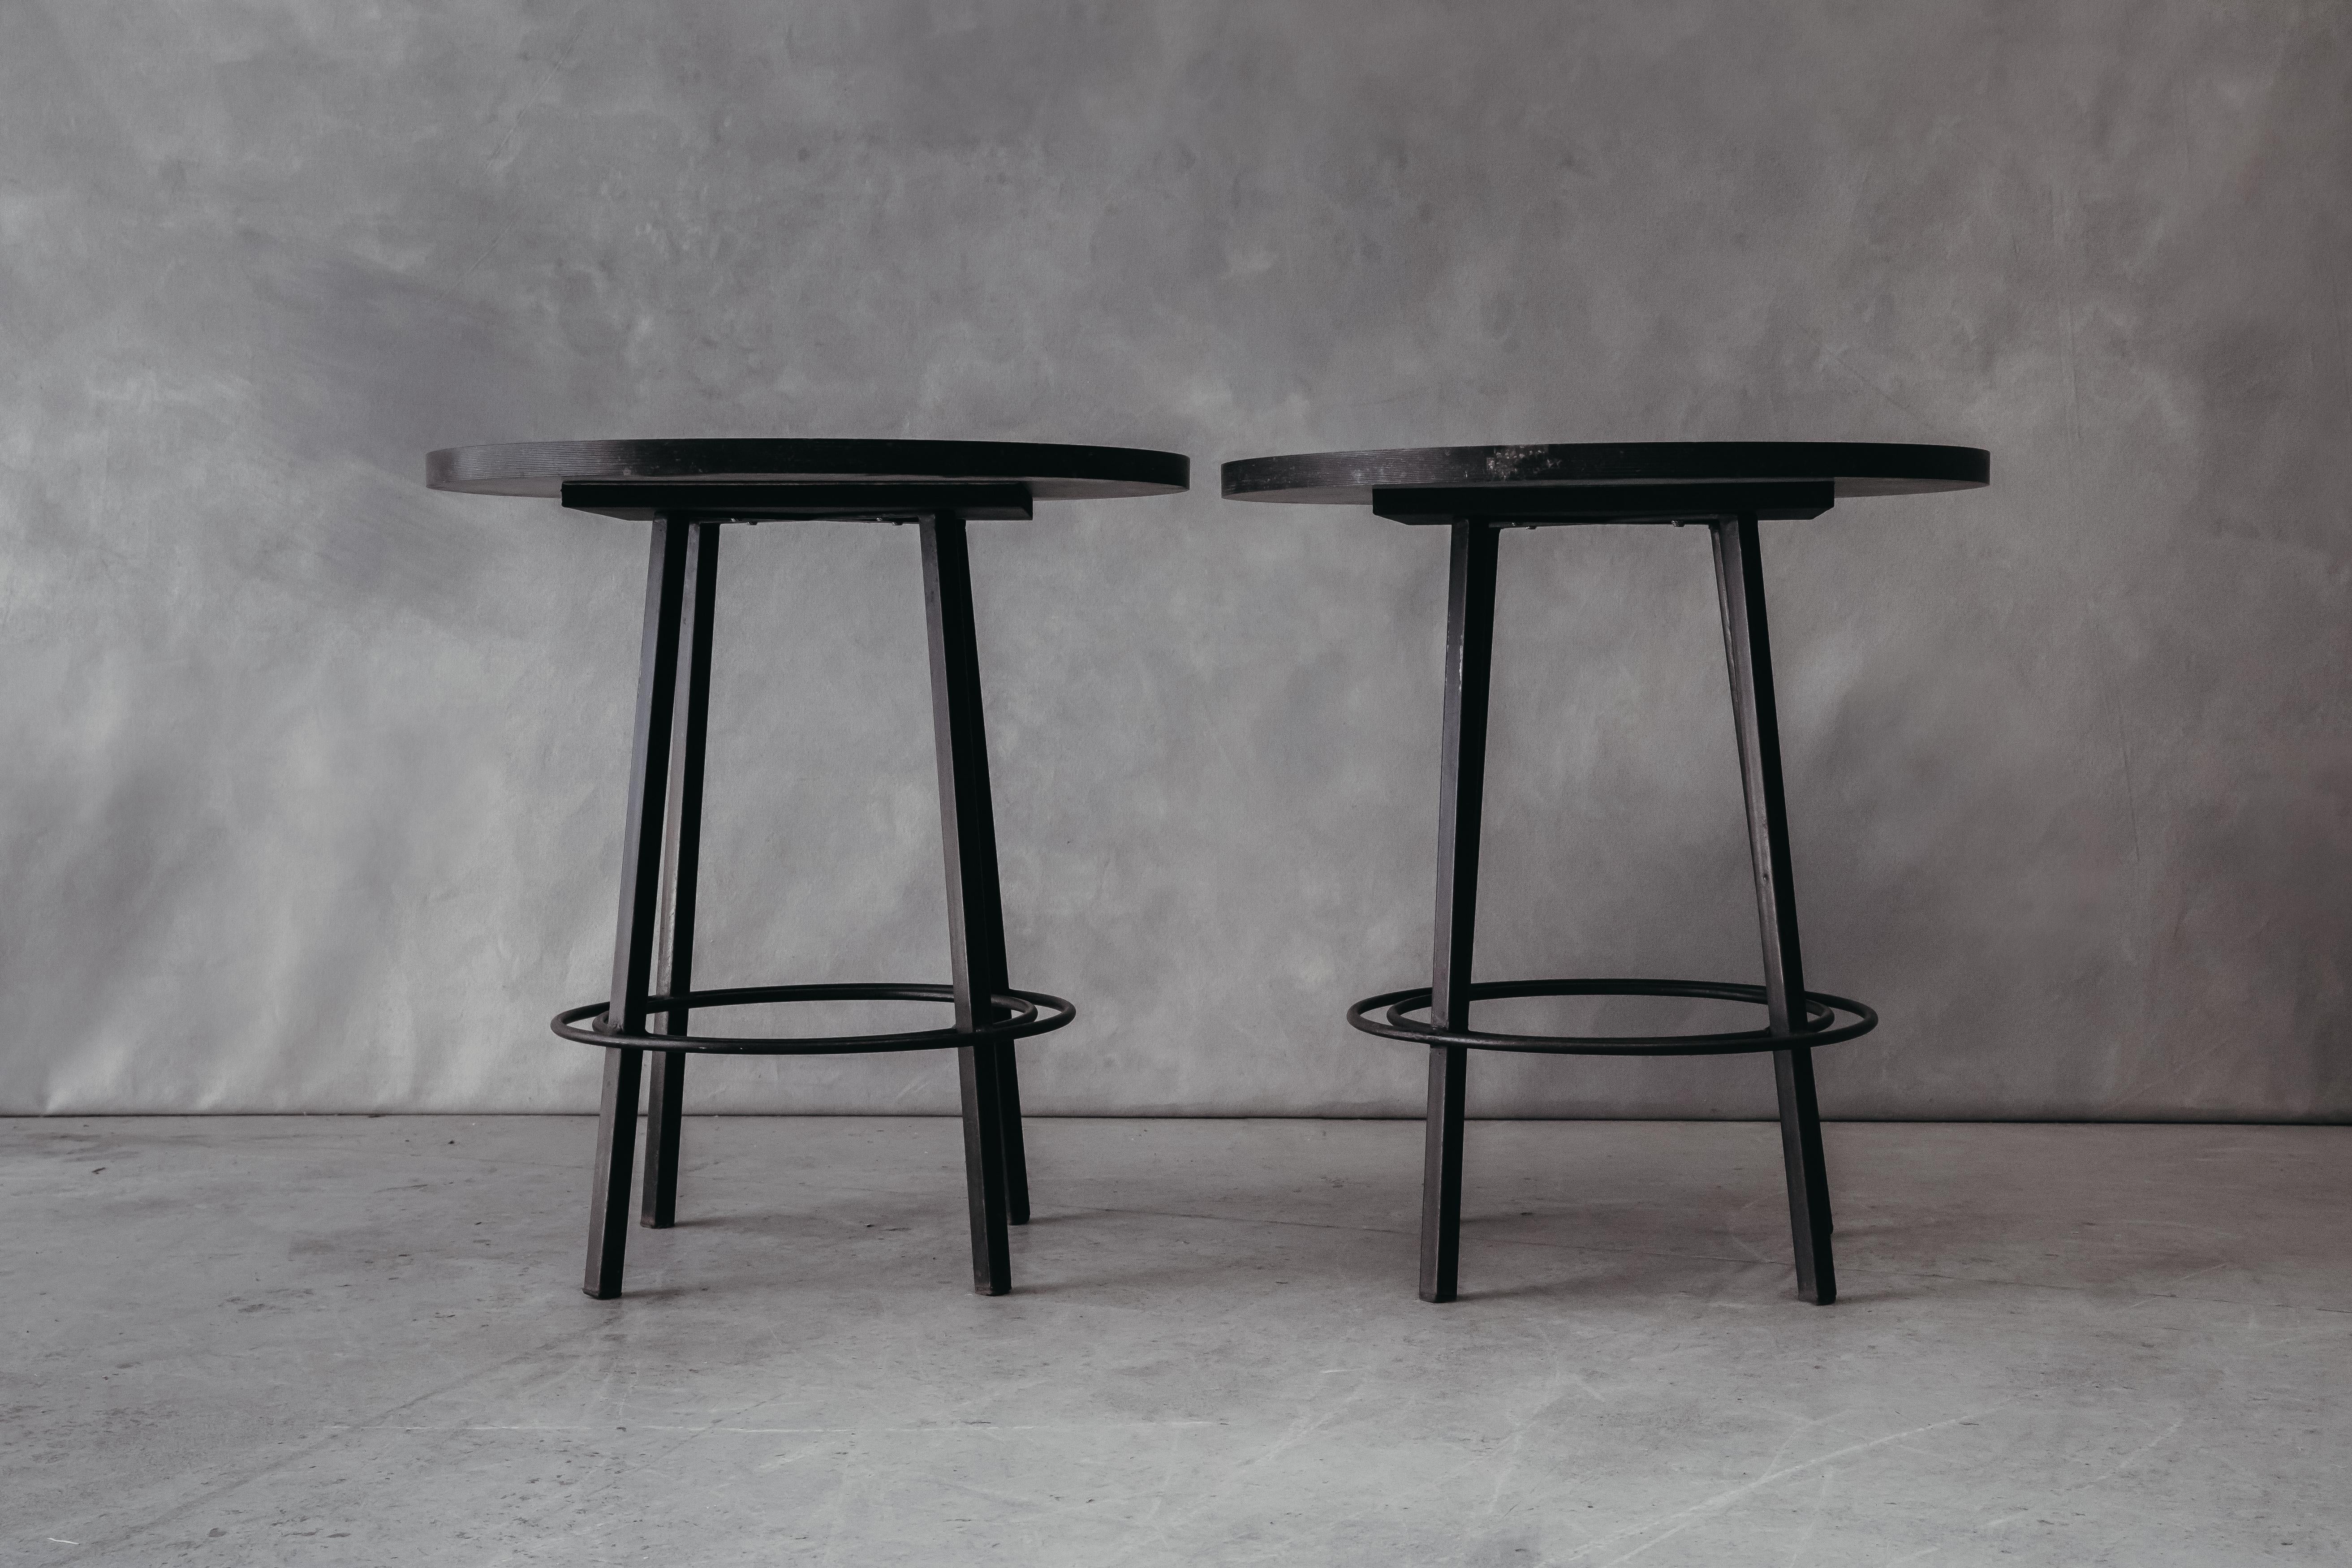 Vintage Pair Of Stone Bistro Tables From France, circa 1970. Solid bluestone top on a metal base.